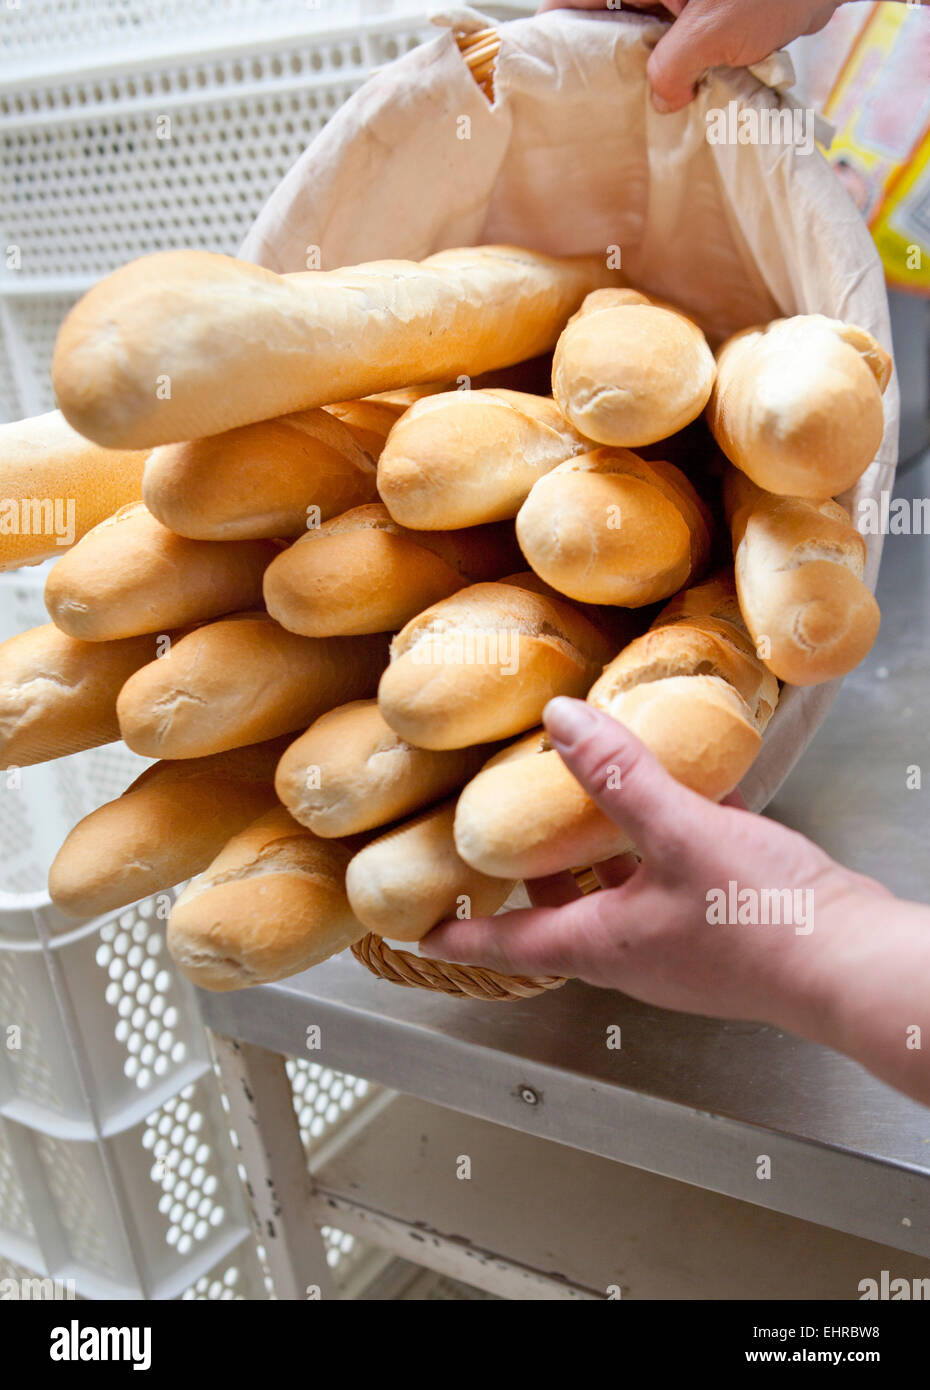 Baguette basket of bread loaves at bakery Stock Photo